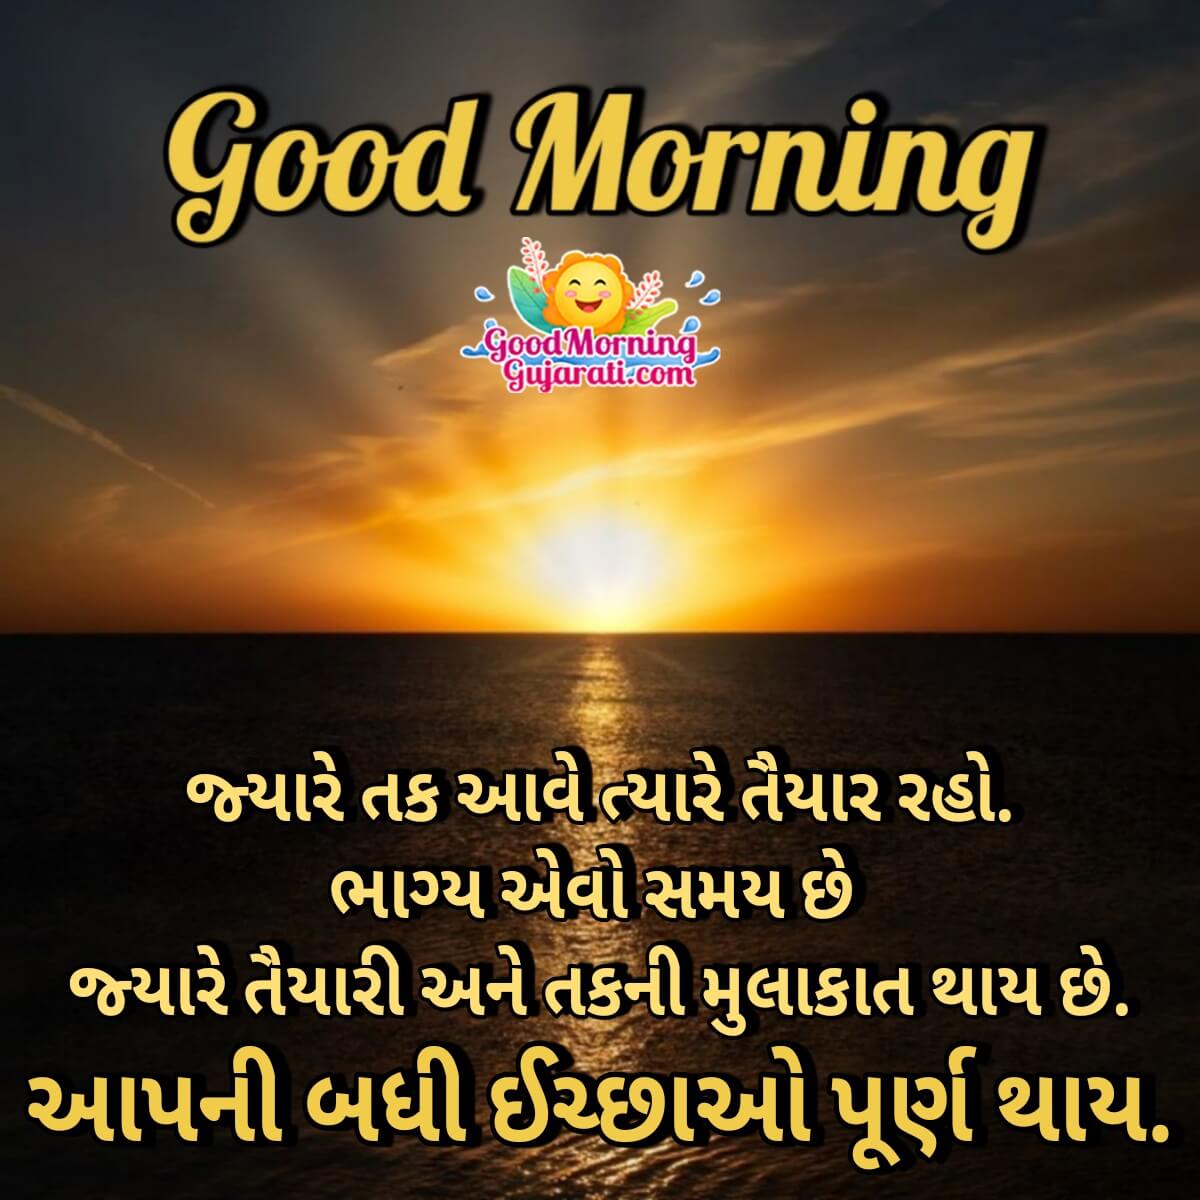 Good Morning Gujarati Quotes - Good Morning Wishes & Images In Gujarati